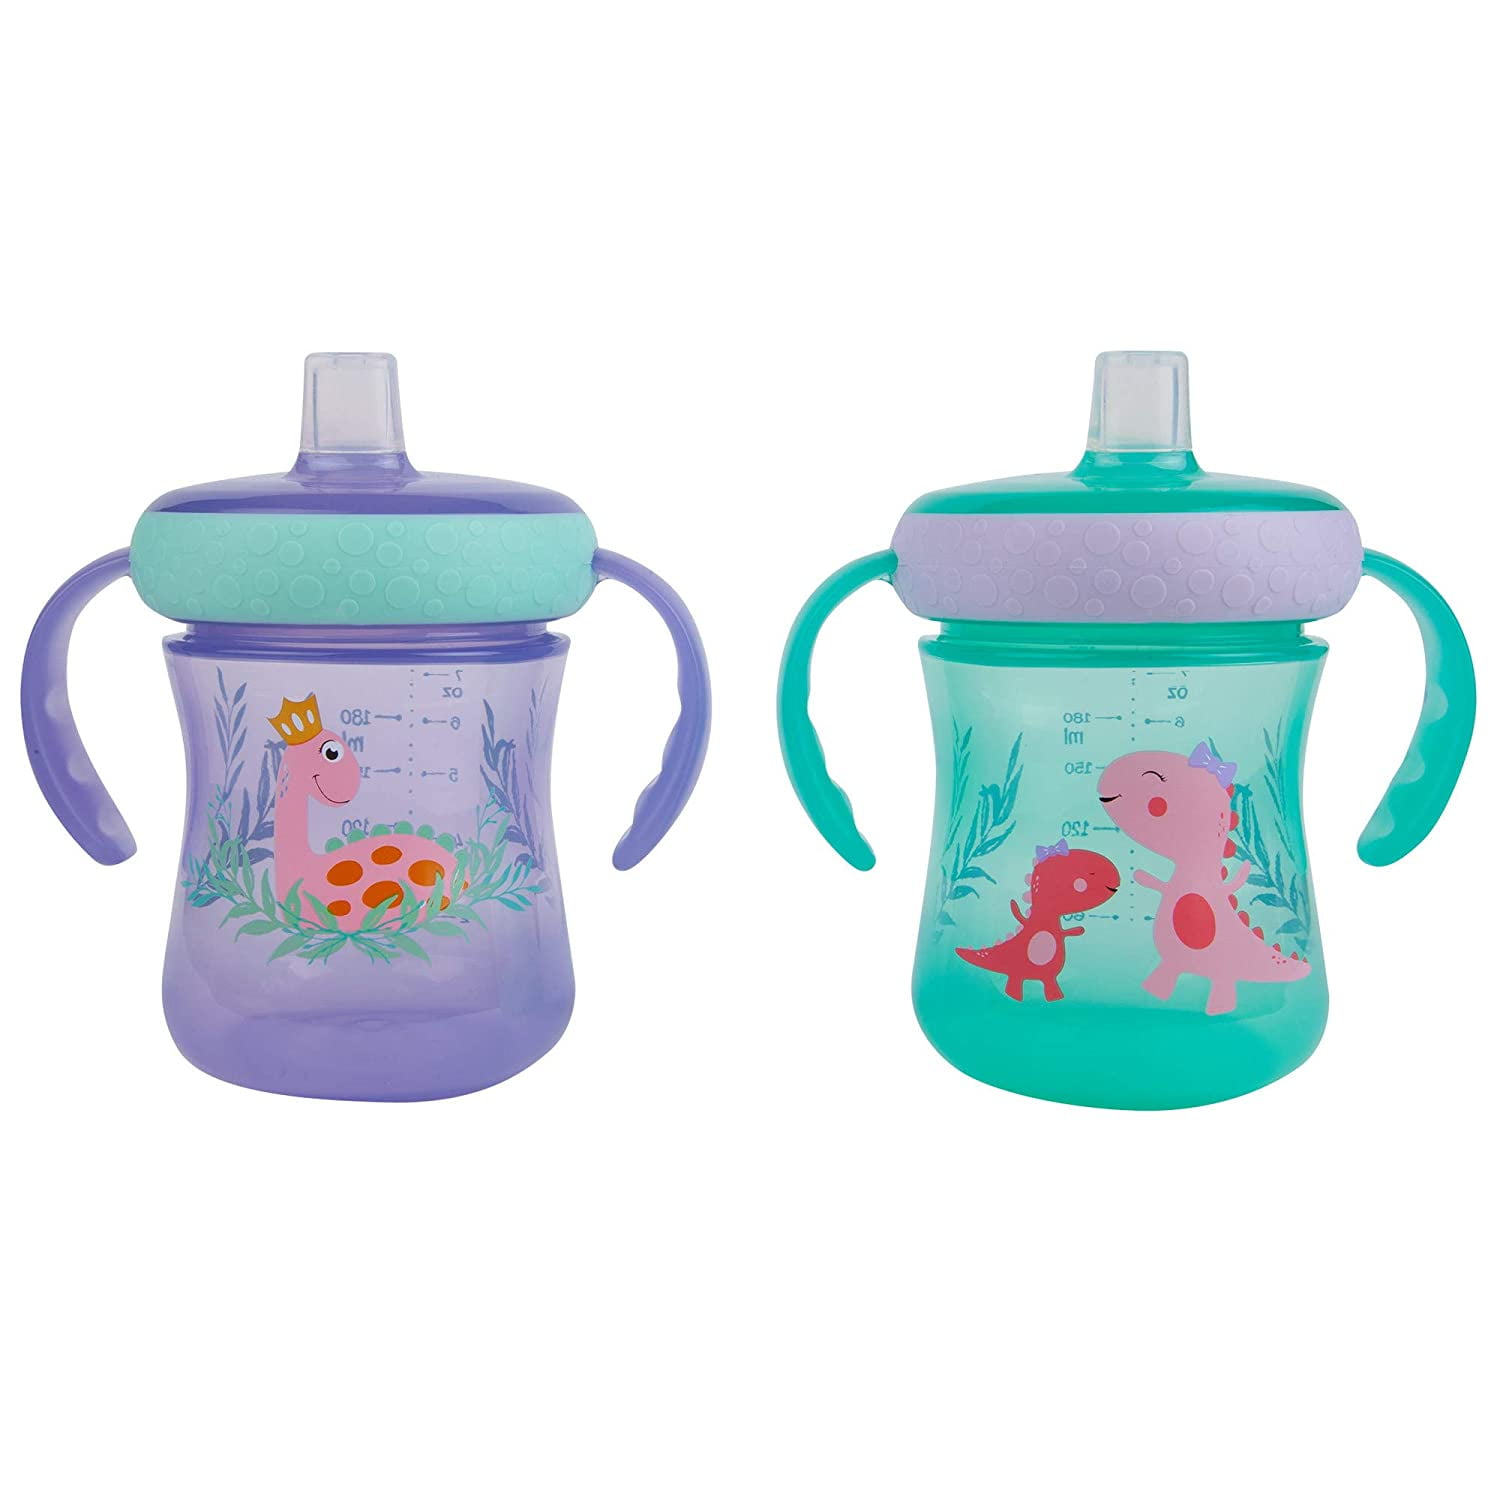 Enino sippy milk cup for big babies 1 year old 2 years old 3 years old and  above ppsu children's direct drinking learning drinking cup